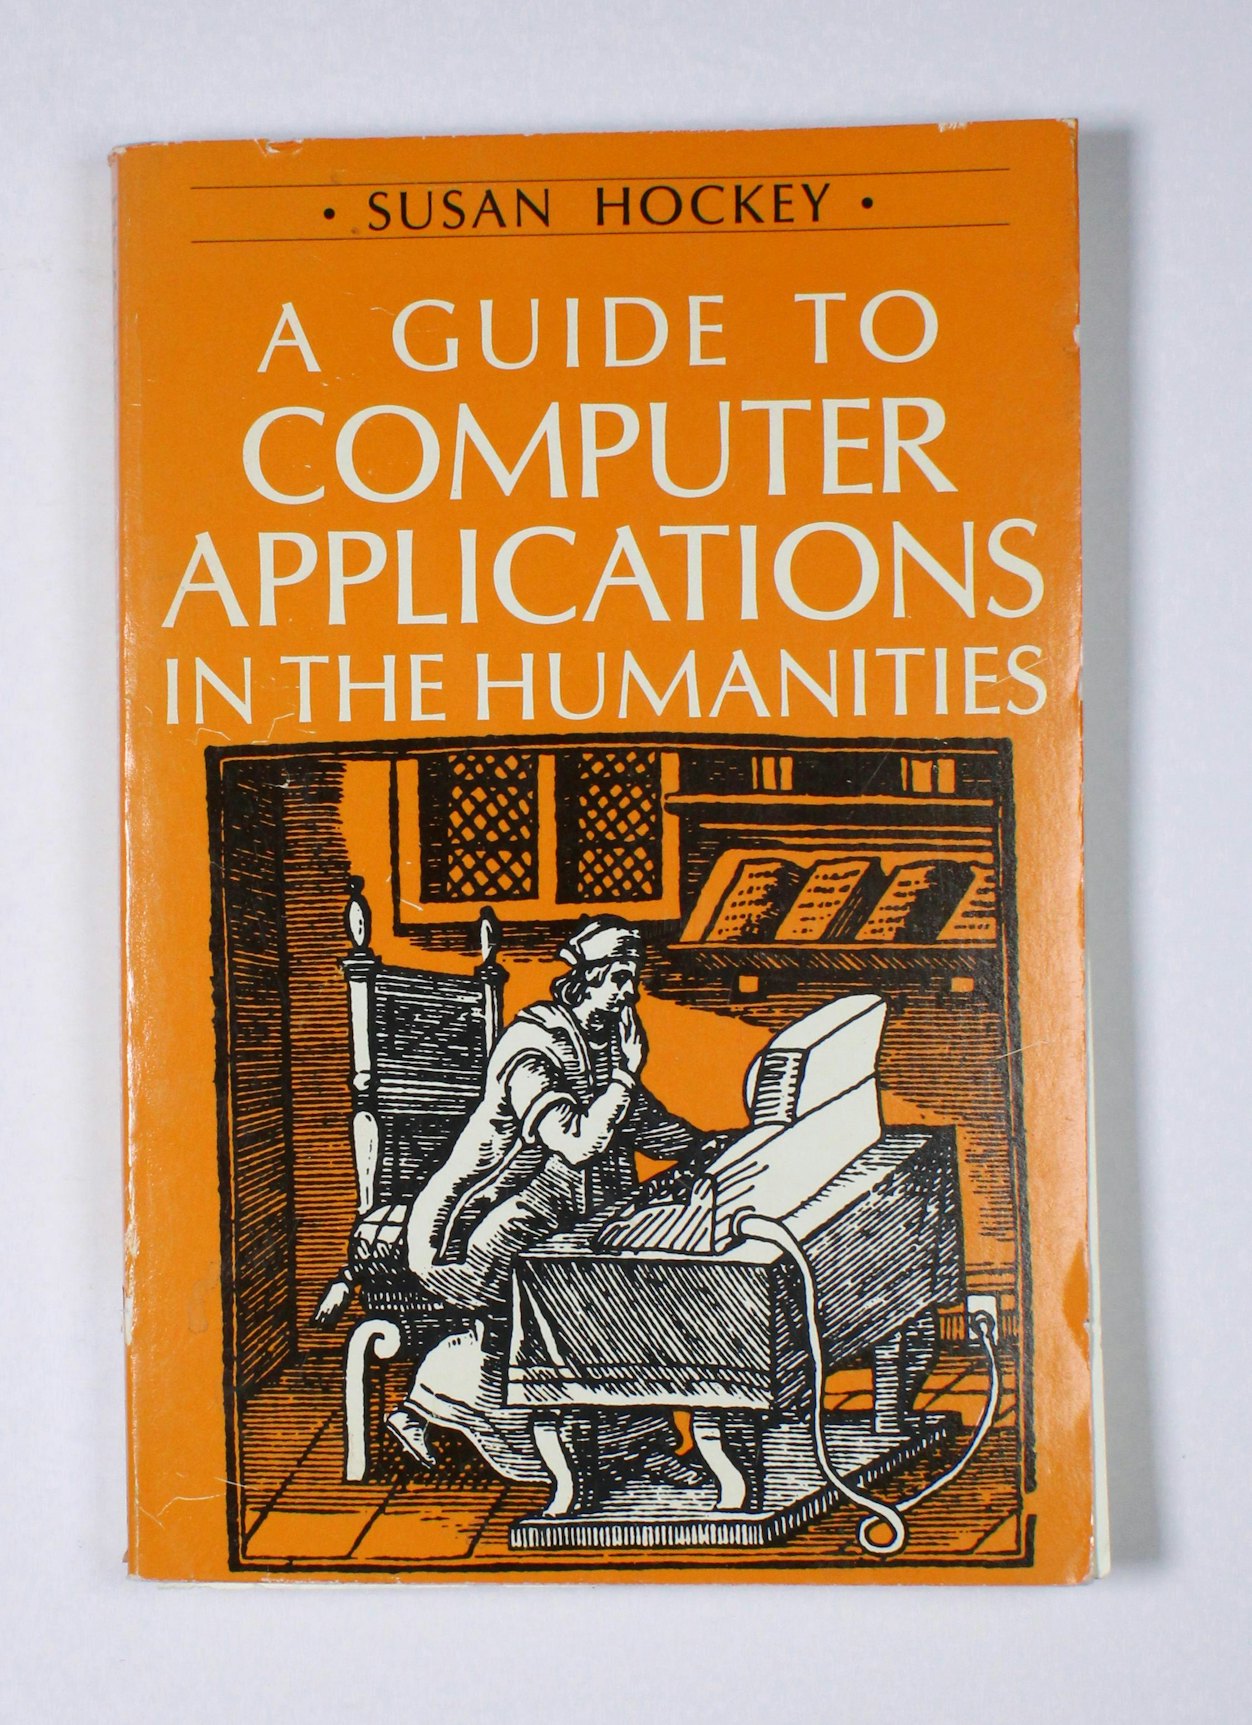 A Guide to Computer Applications in the Humanities